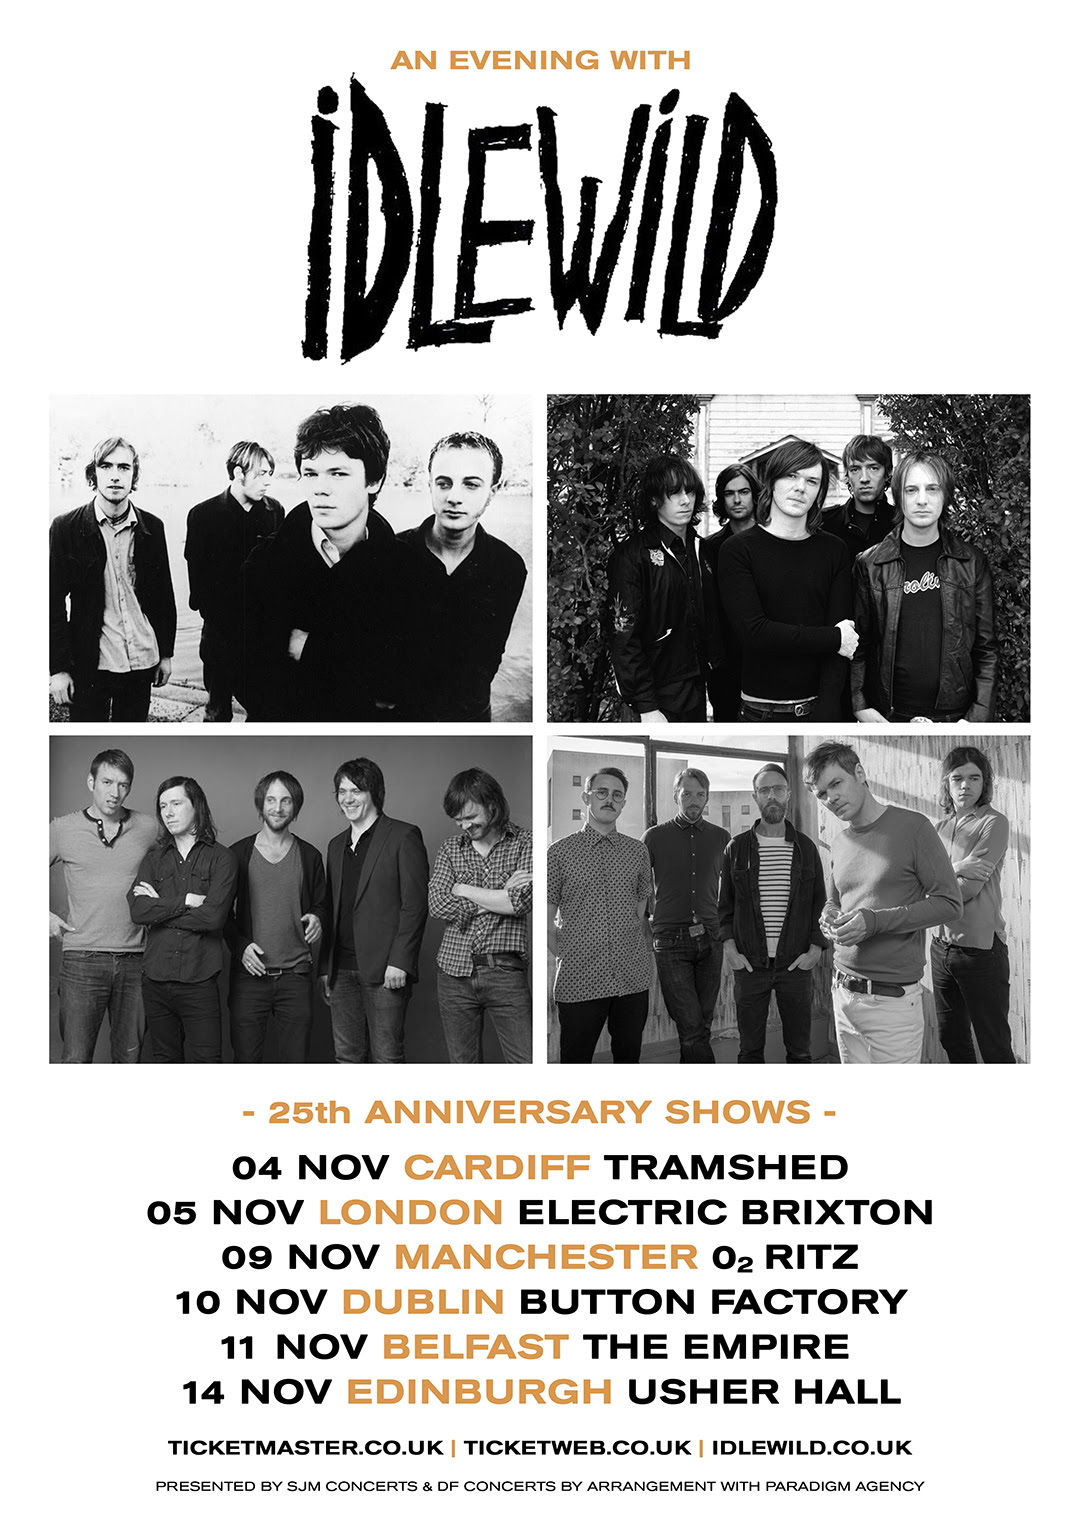 NEWS: Idlewild announce 25th anniversary shows for November